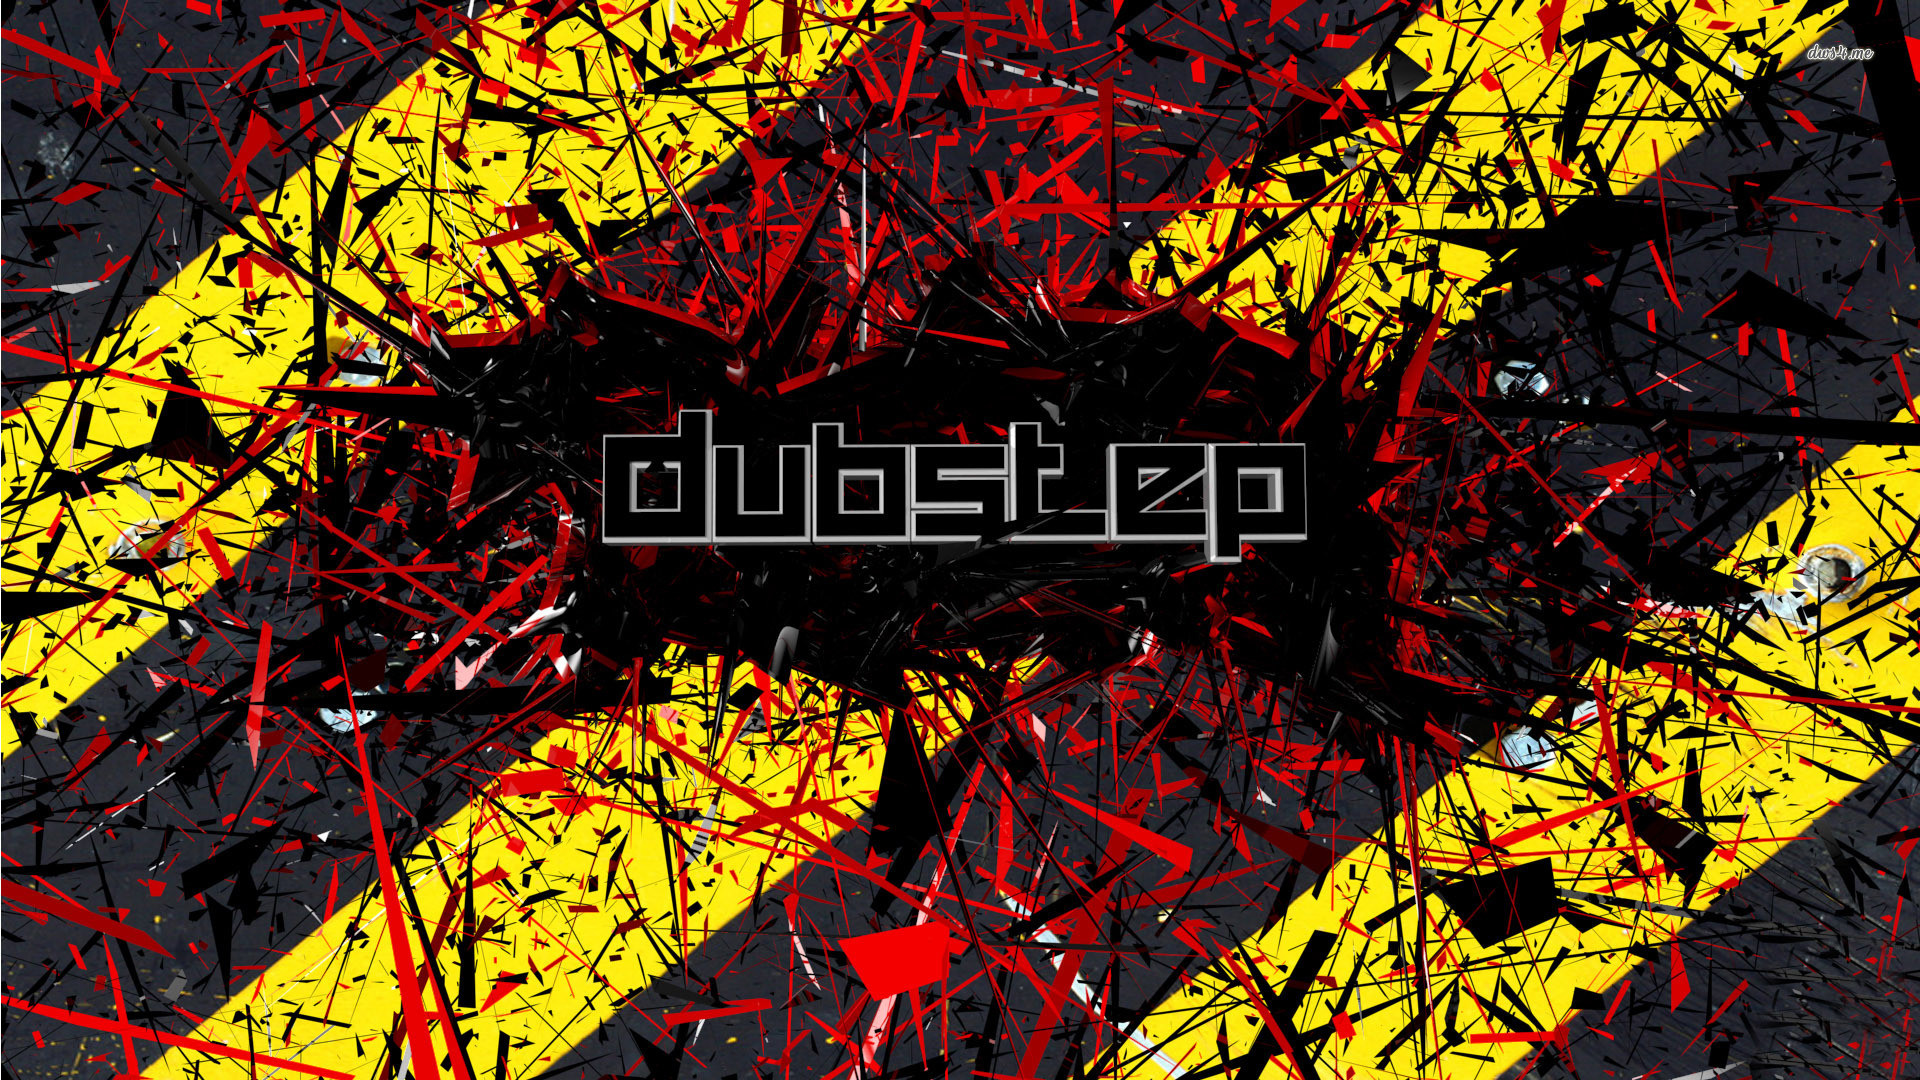 1920x1080 ... Interesting Dubstep HD Widescreen Background Images Collection:   on GsFDcY ...